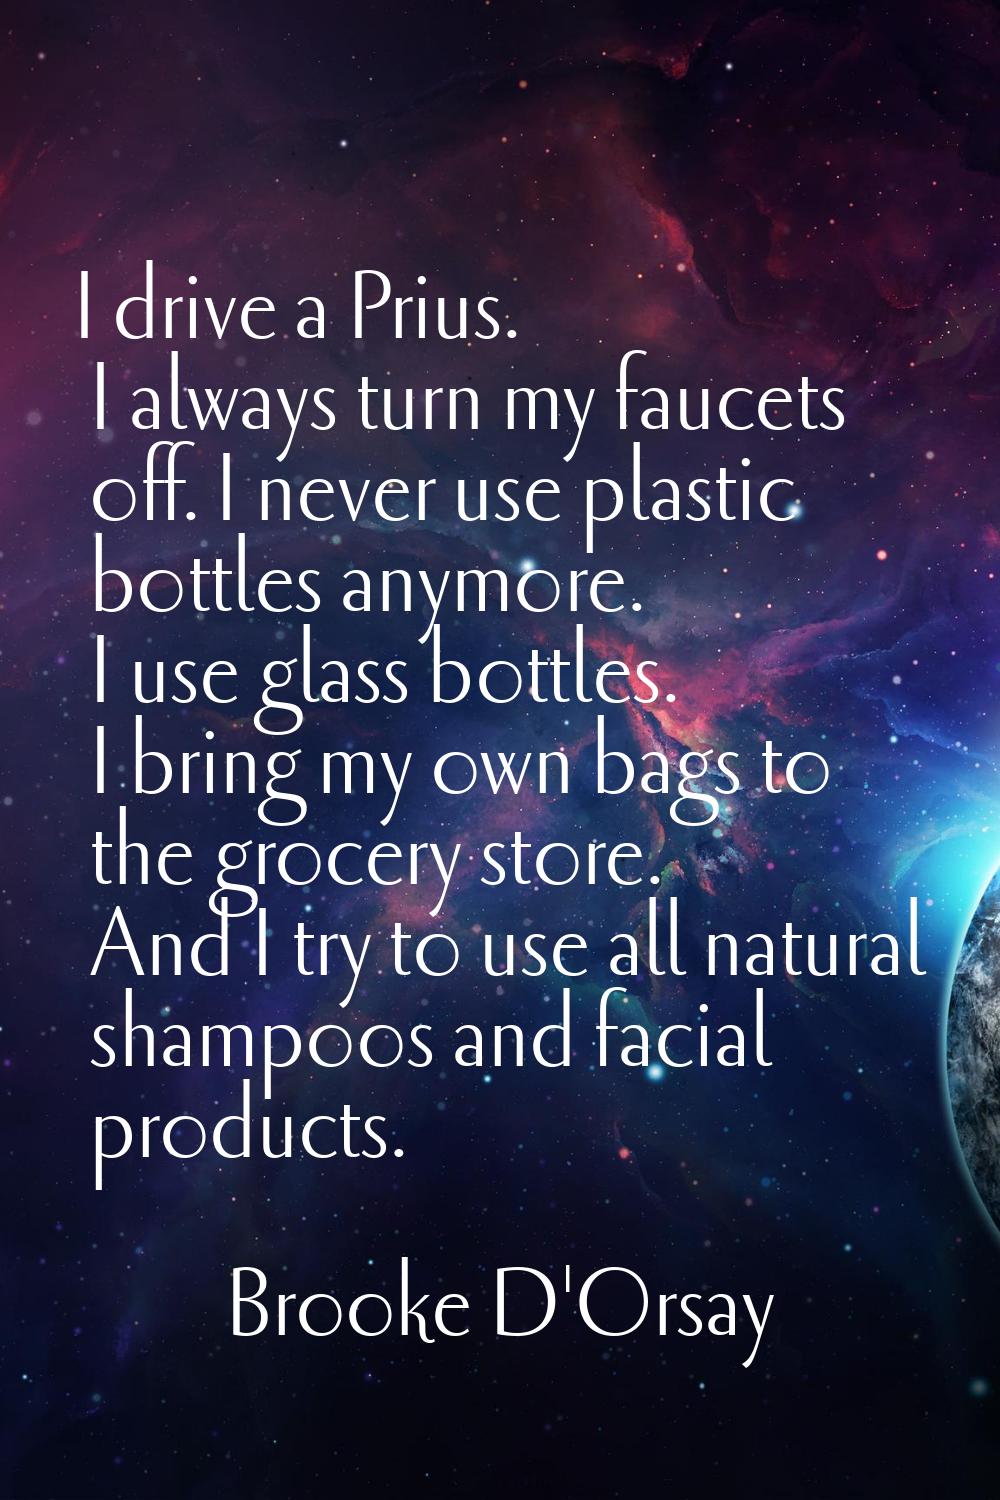 I drive a Prius. I always turn my faucets off. I never use plastic bottles anymore. I use glass bot